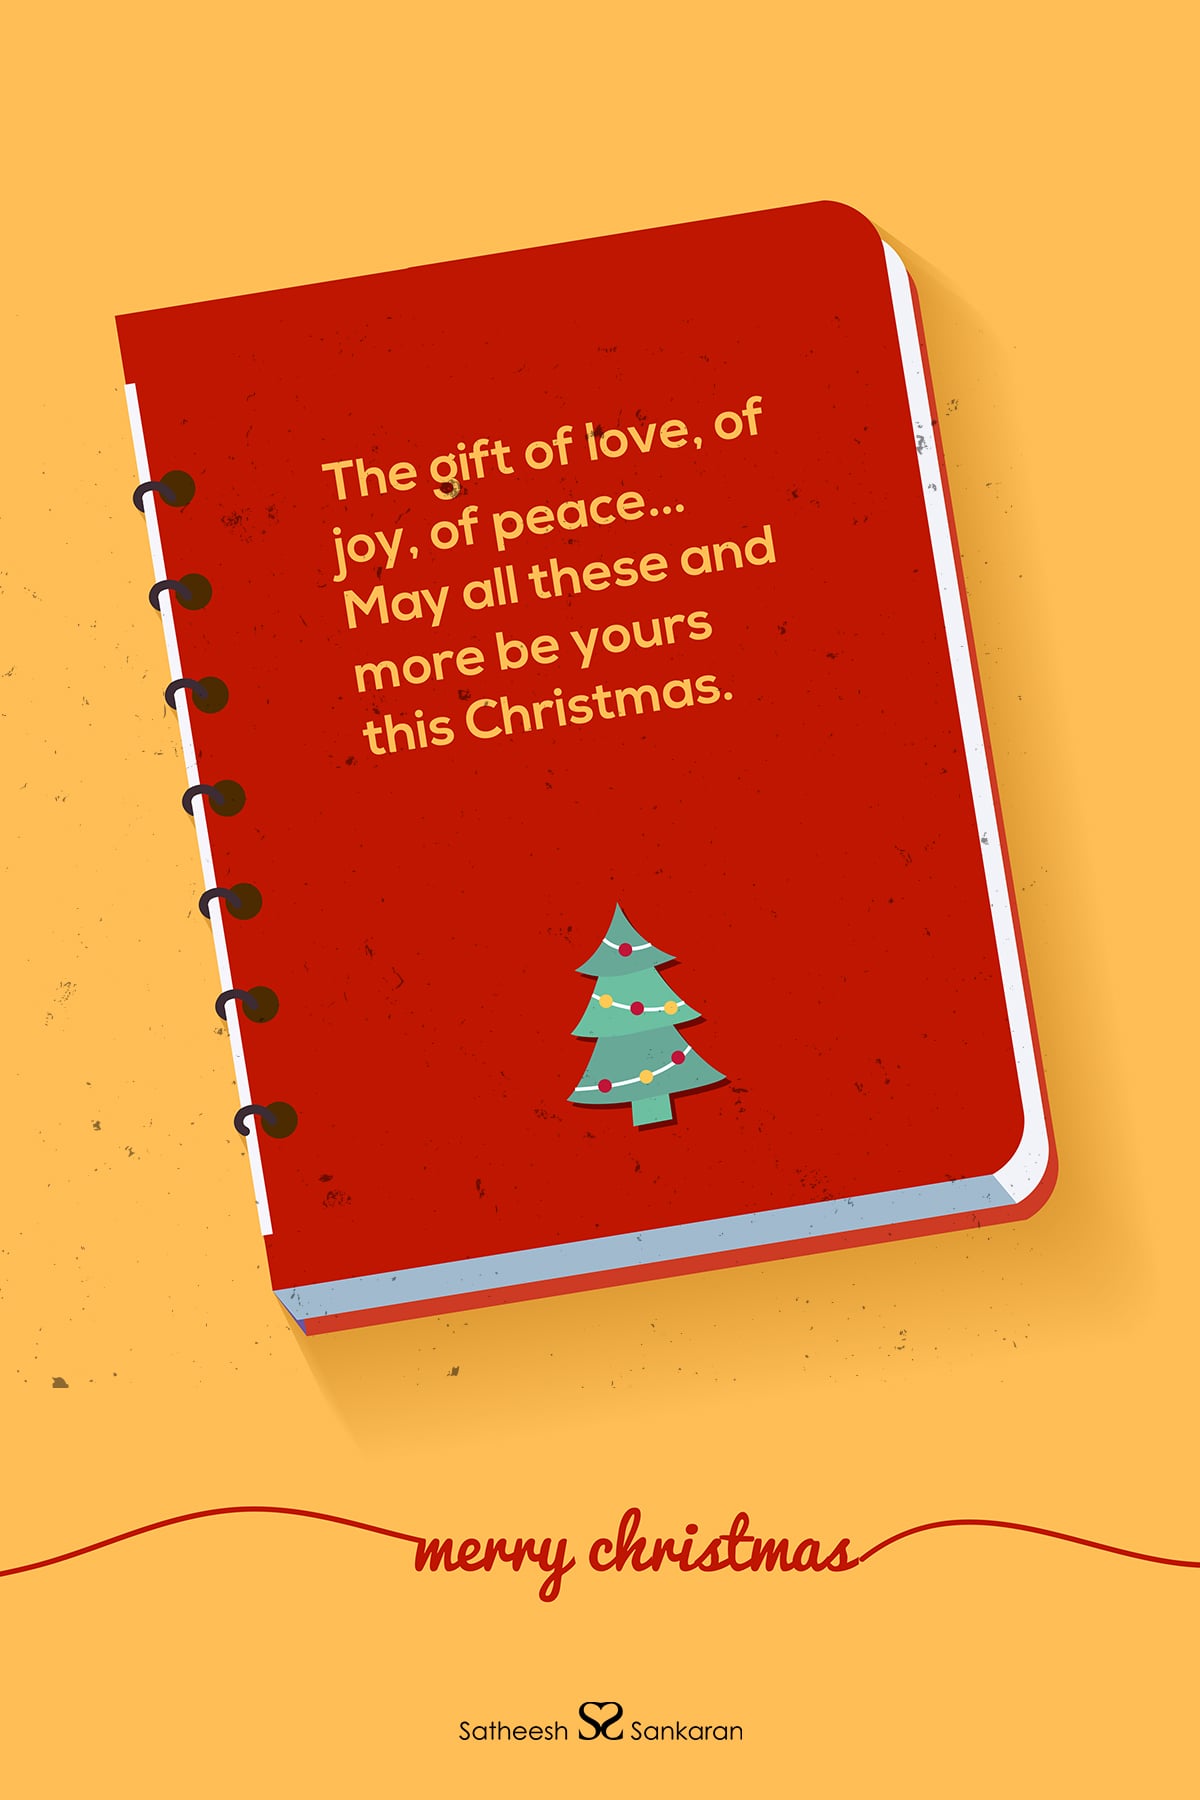 The gift of love, of joy, of peace... May all these and more be yours this Christmas.